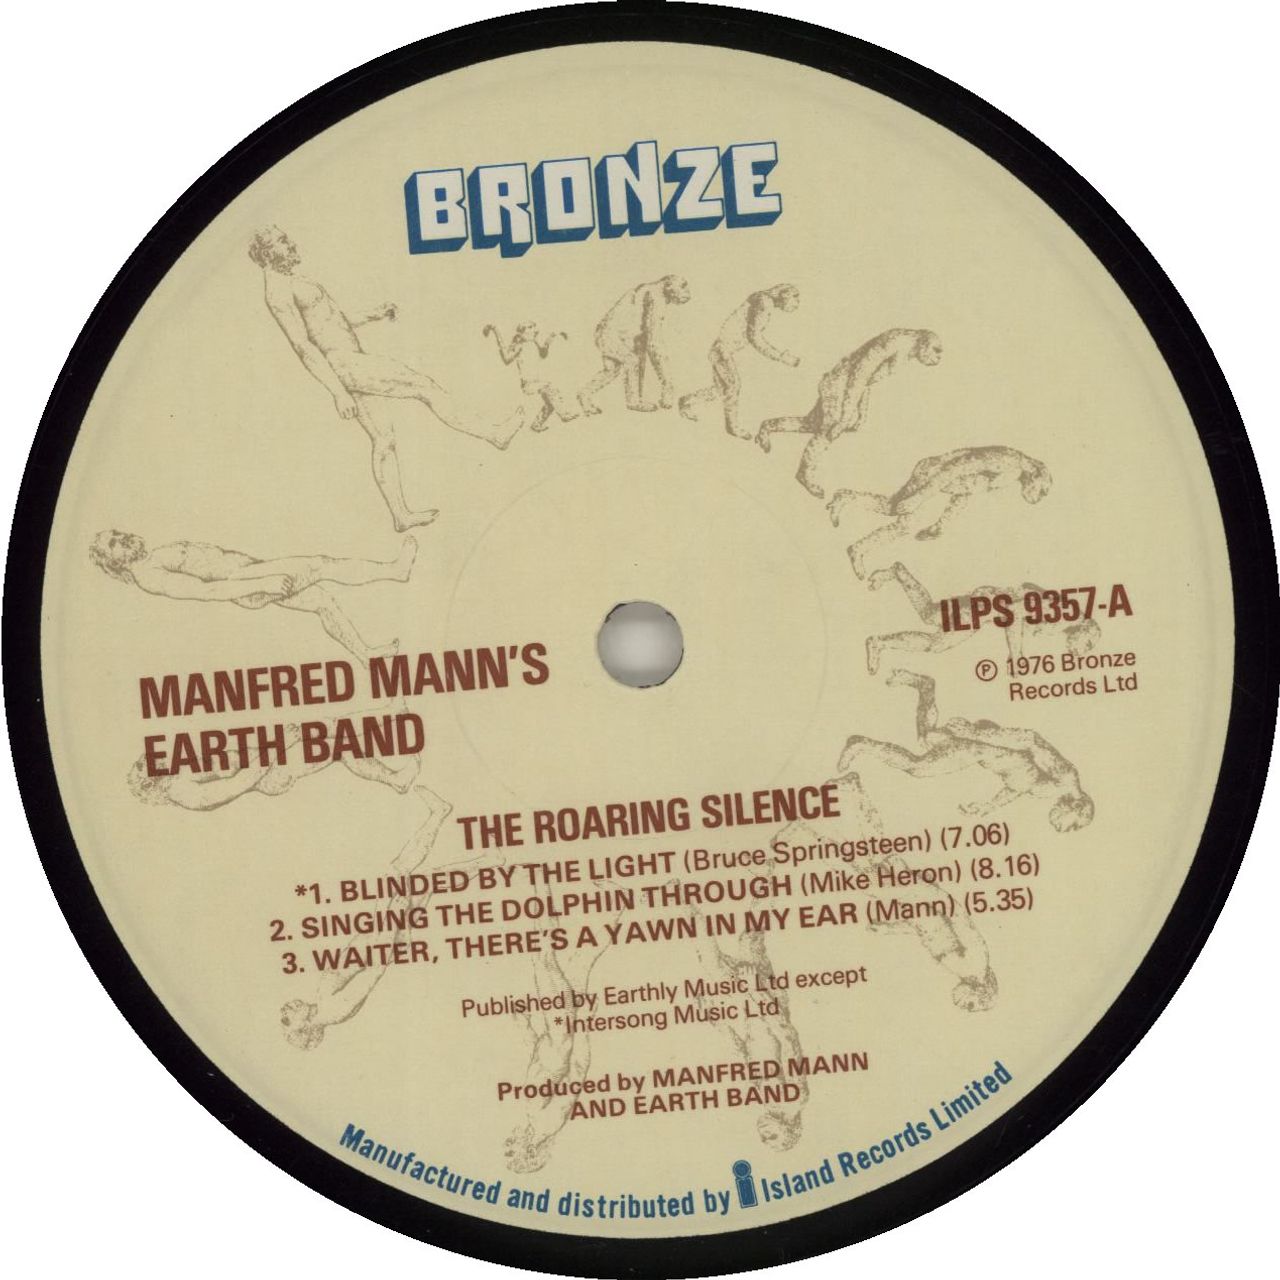 Manfred Mann's Earth Band - This Side Of Paradise Lyrics